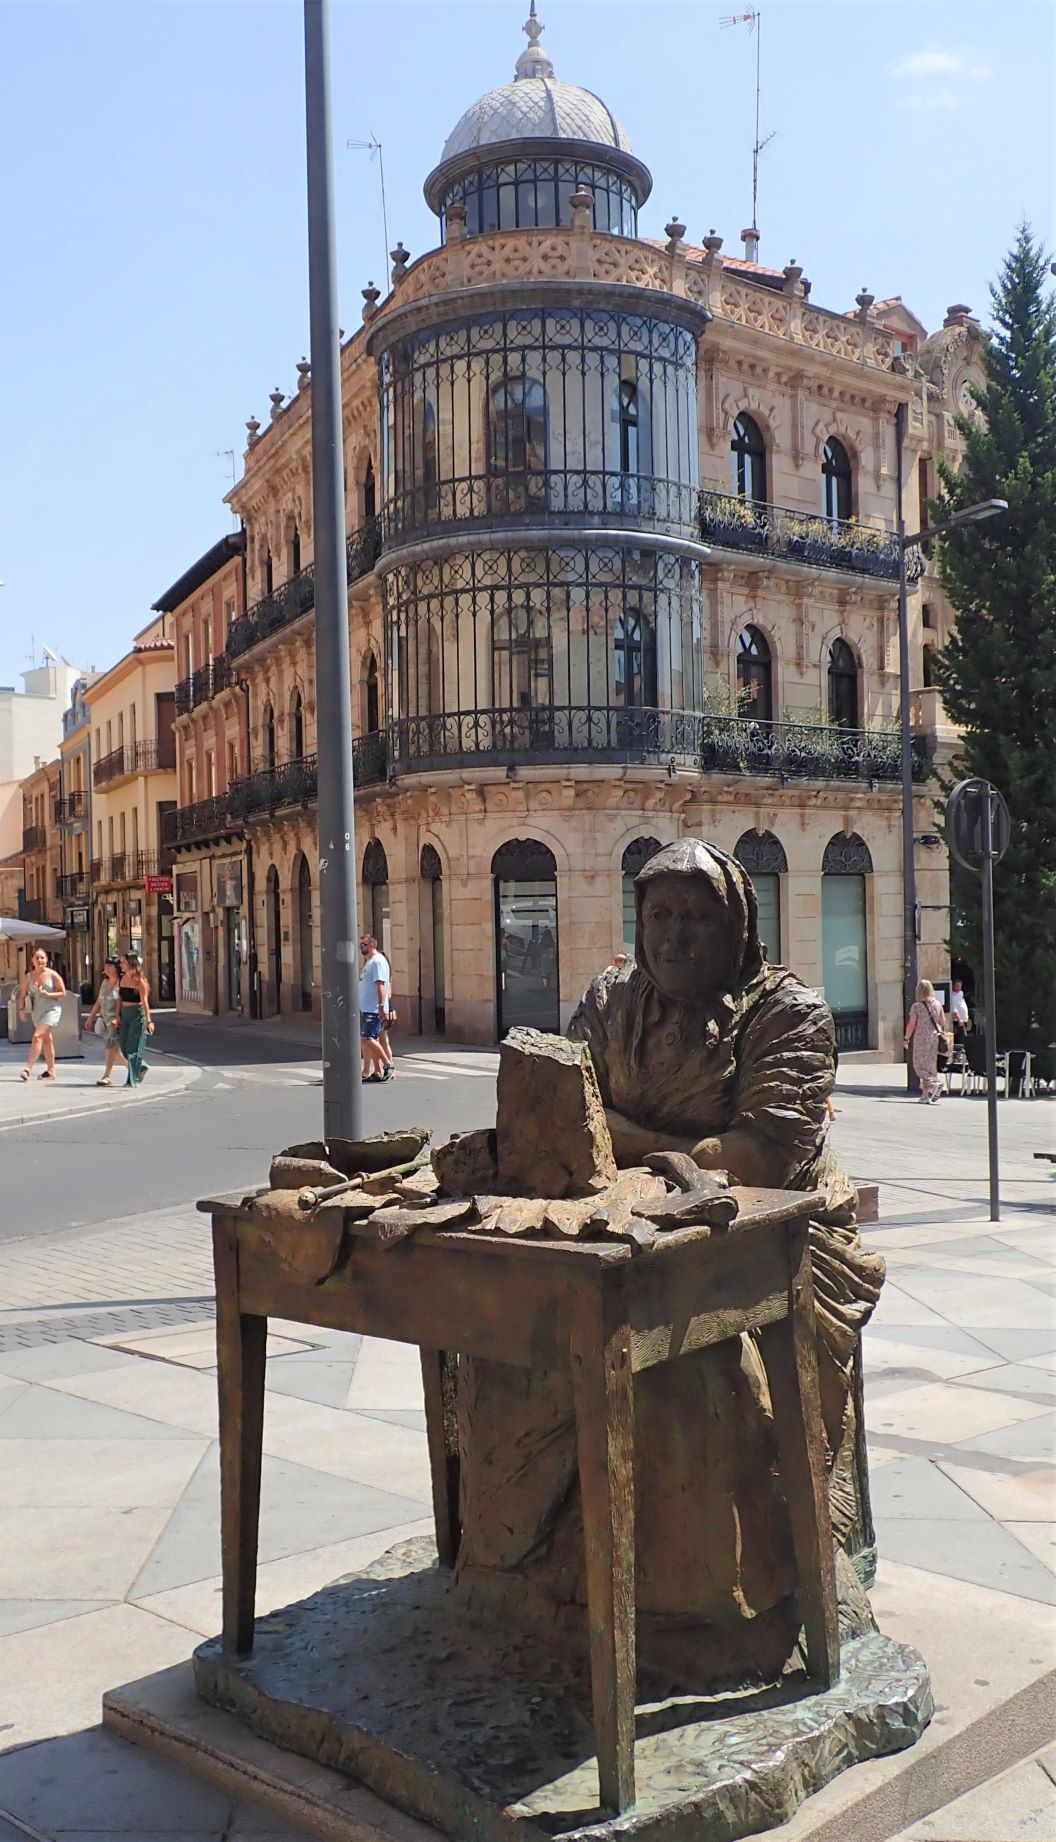 Things to see in Salamanca: statue of the Alberca Woman in front of the Central Market building